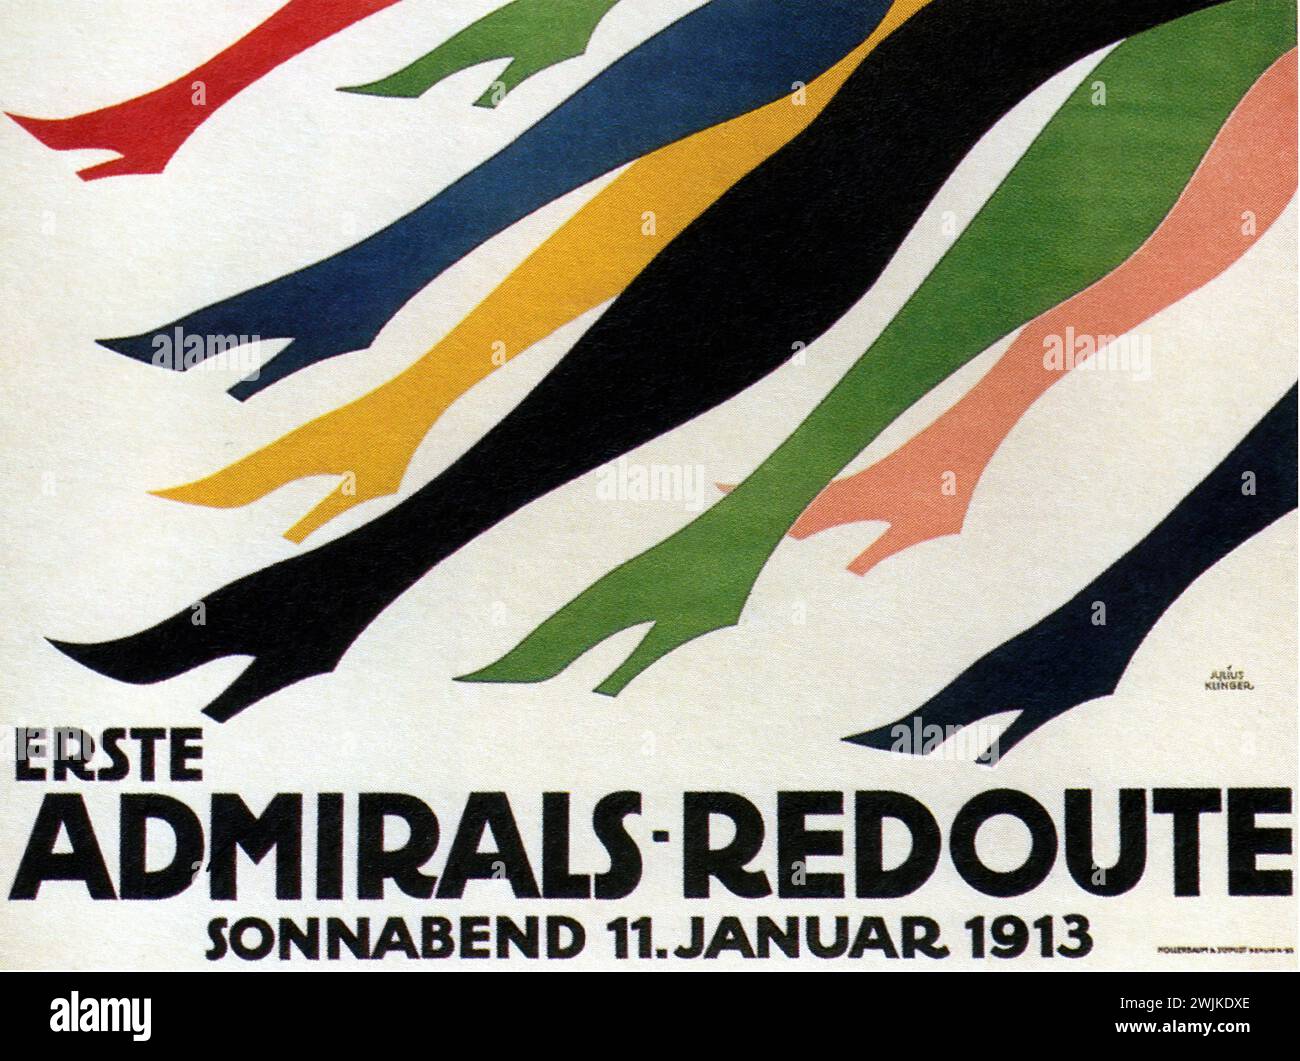 'ERSTE ADMIRALS-REDOUTE SONNABEND 11.JANUAR 1913' ['FIRST ADMIRALS' BALL SATURDAY JANUARY 11, 1913'] Vintage German Advertising. The image is a stylized advertisement featuring abstract, flowing flags in a dynamic arrangement, representing the event's elegance and movement. The graphic style is reminiscent of early 20th-century art with a focus on form and color over detail. Stock Photo